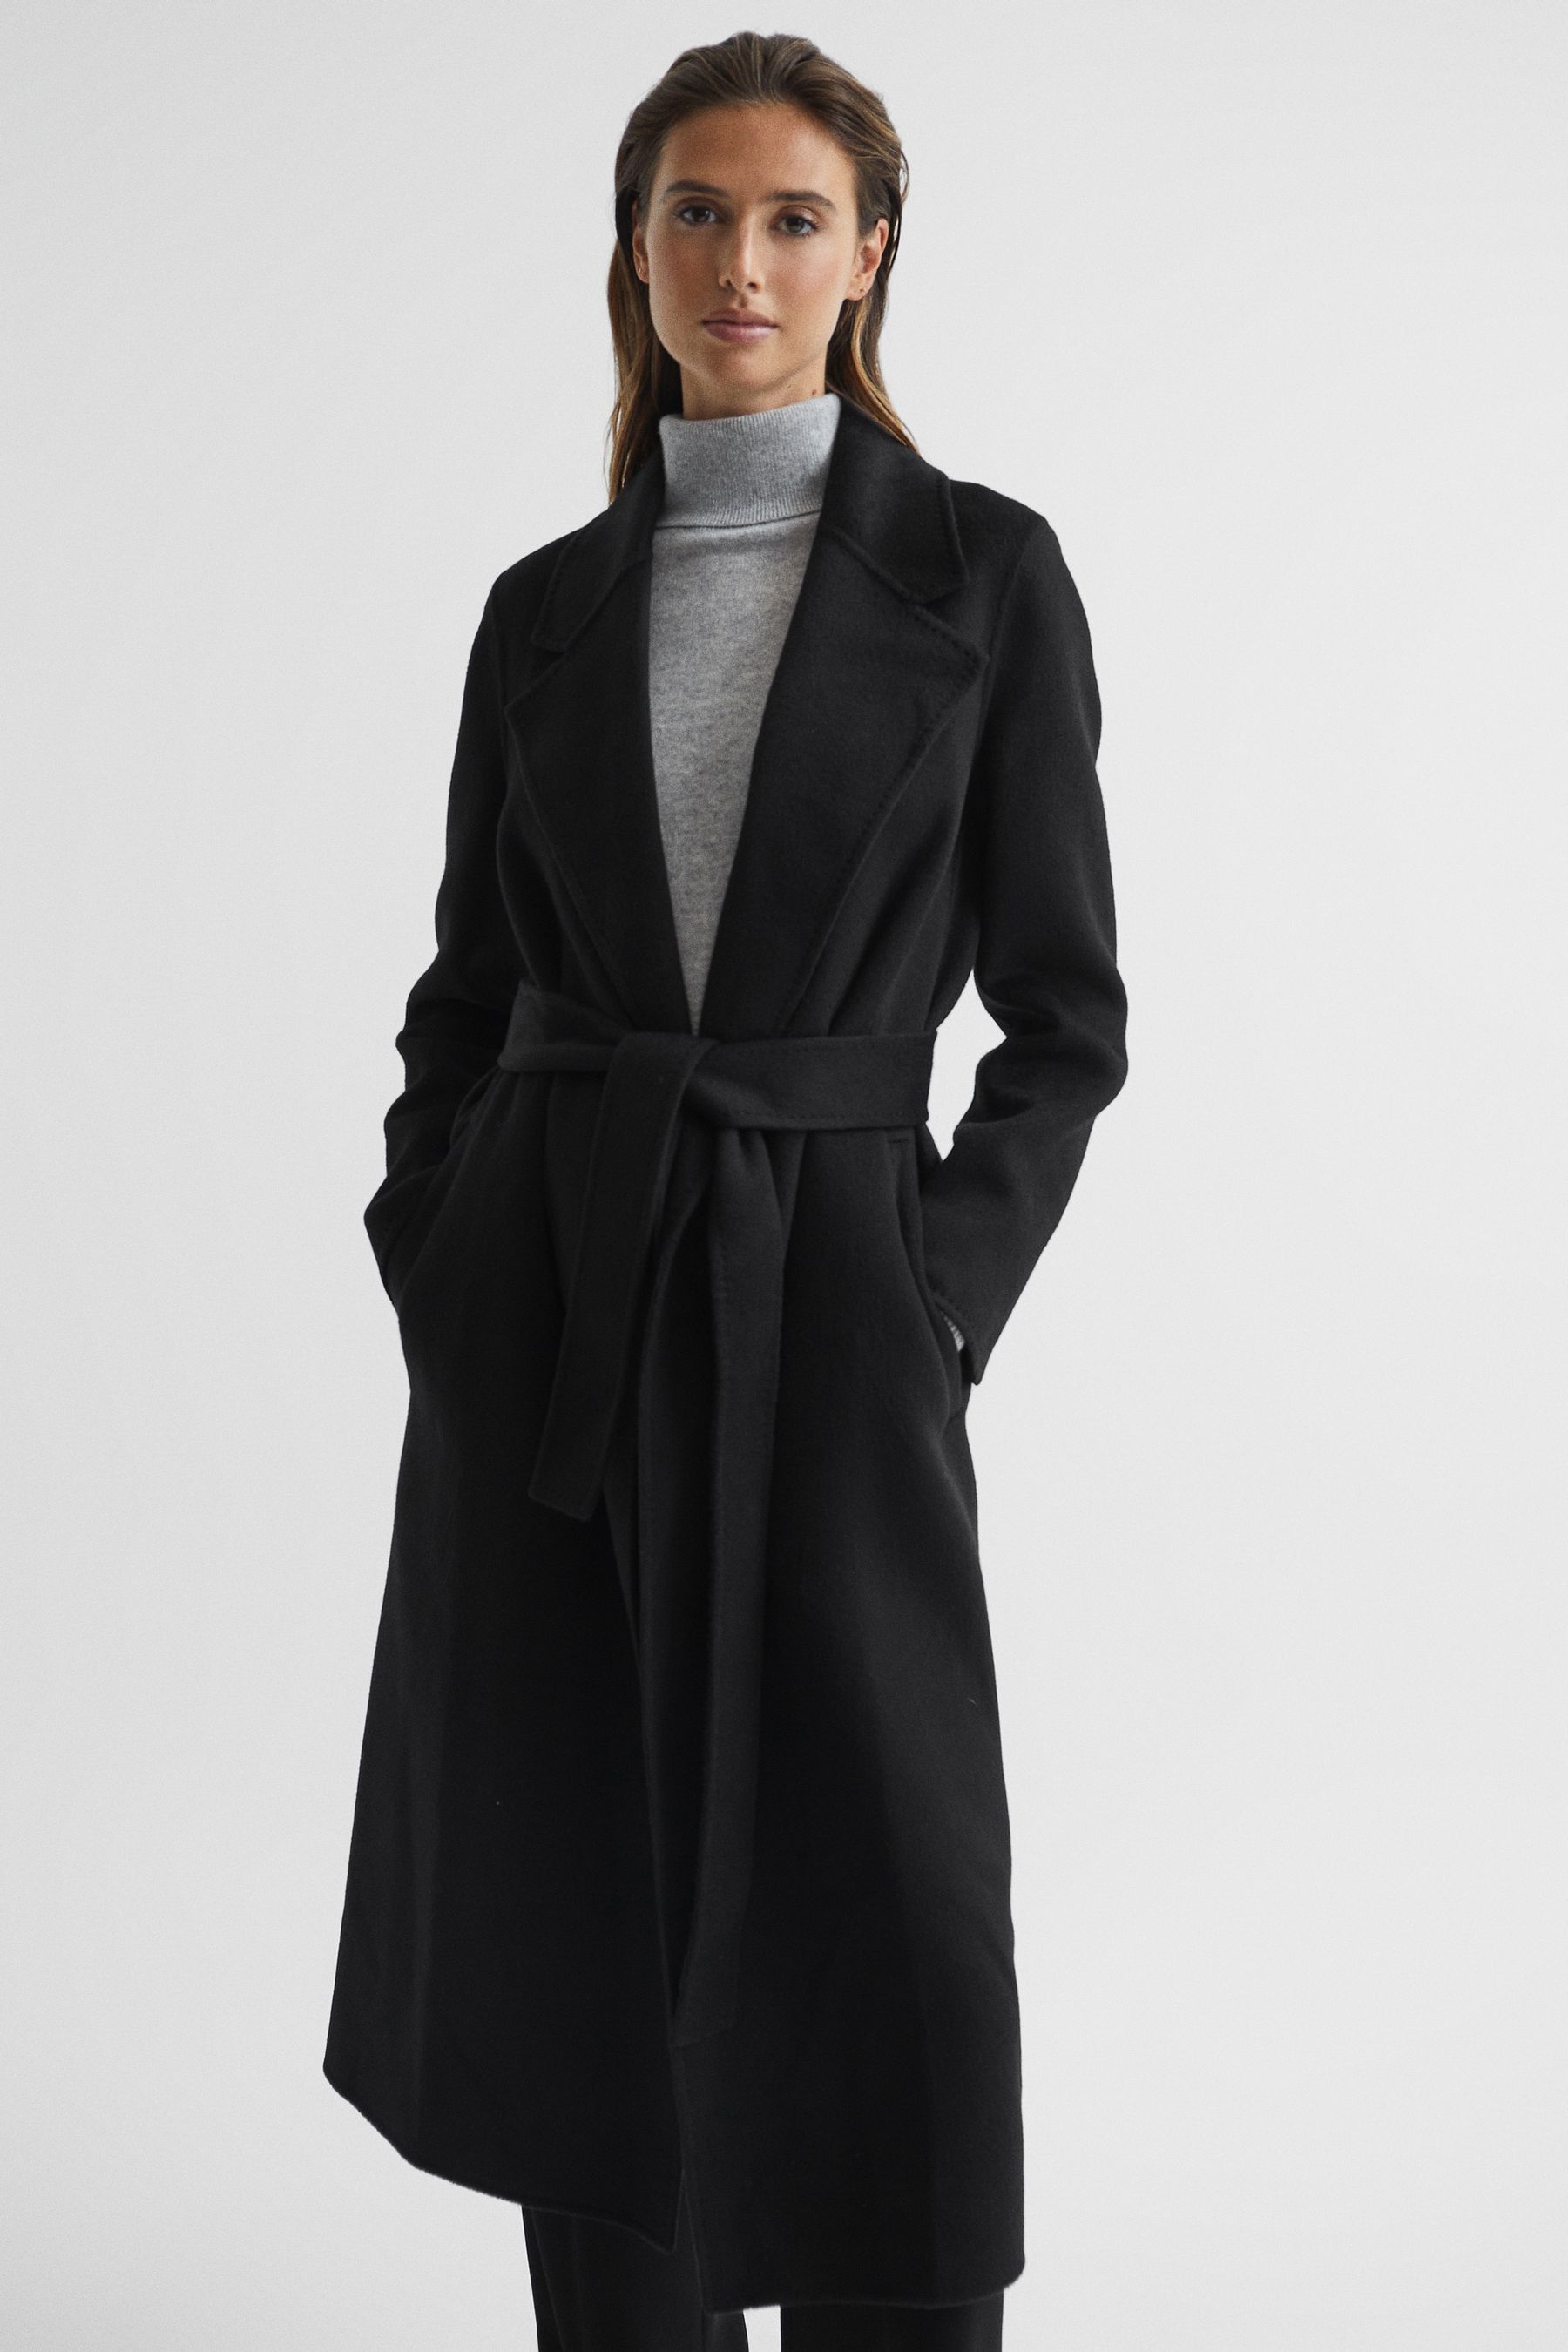 Buy Reiss Black Honor 100% Cashmere Wool Blindseam Long Coat from the ...